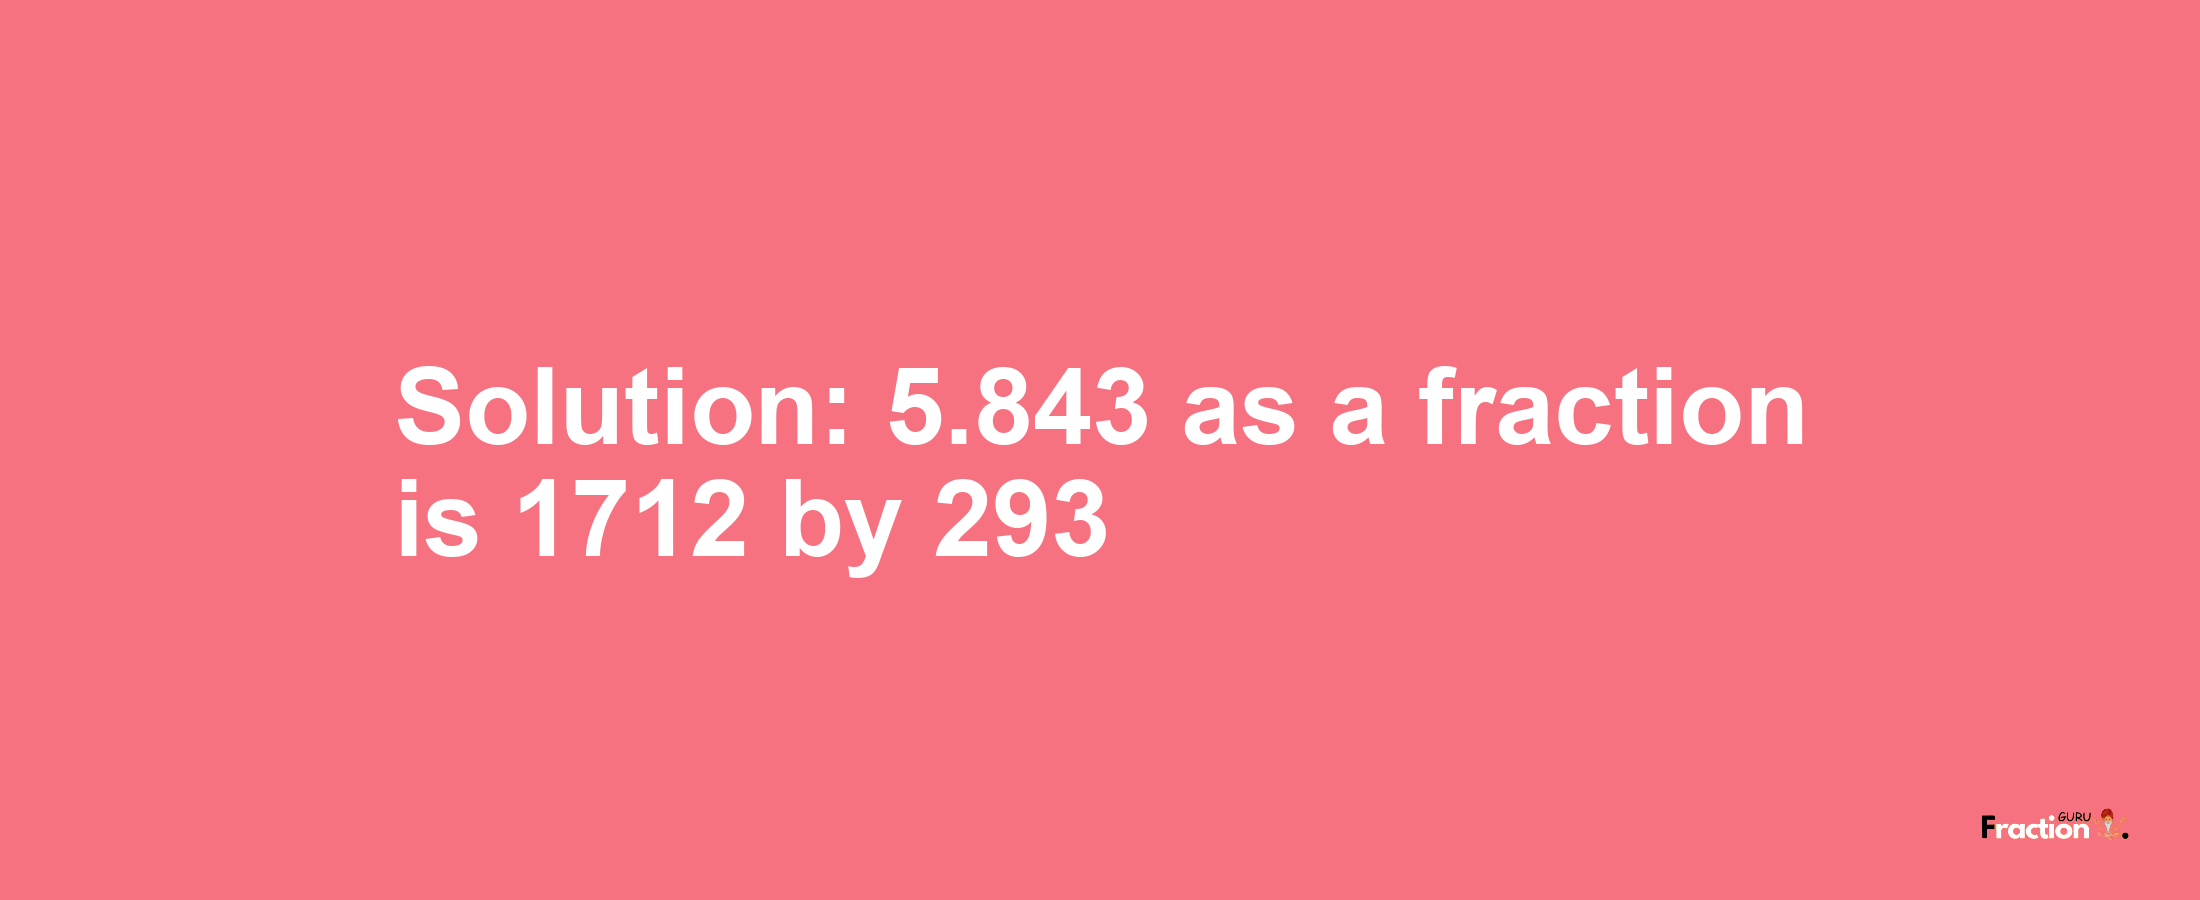 Solution:5.843 as a fraction is 1712/293